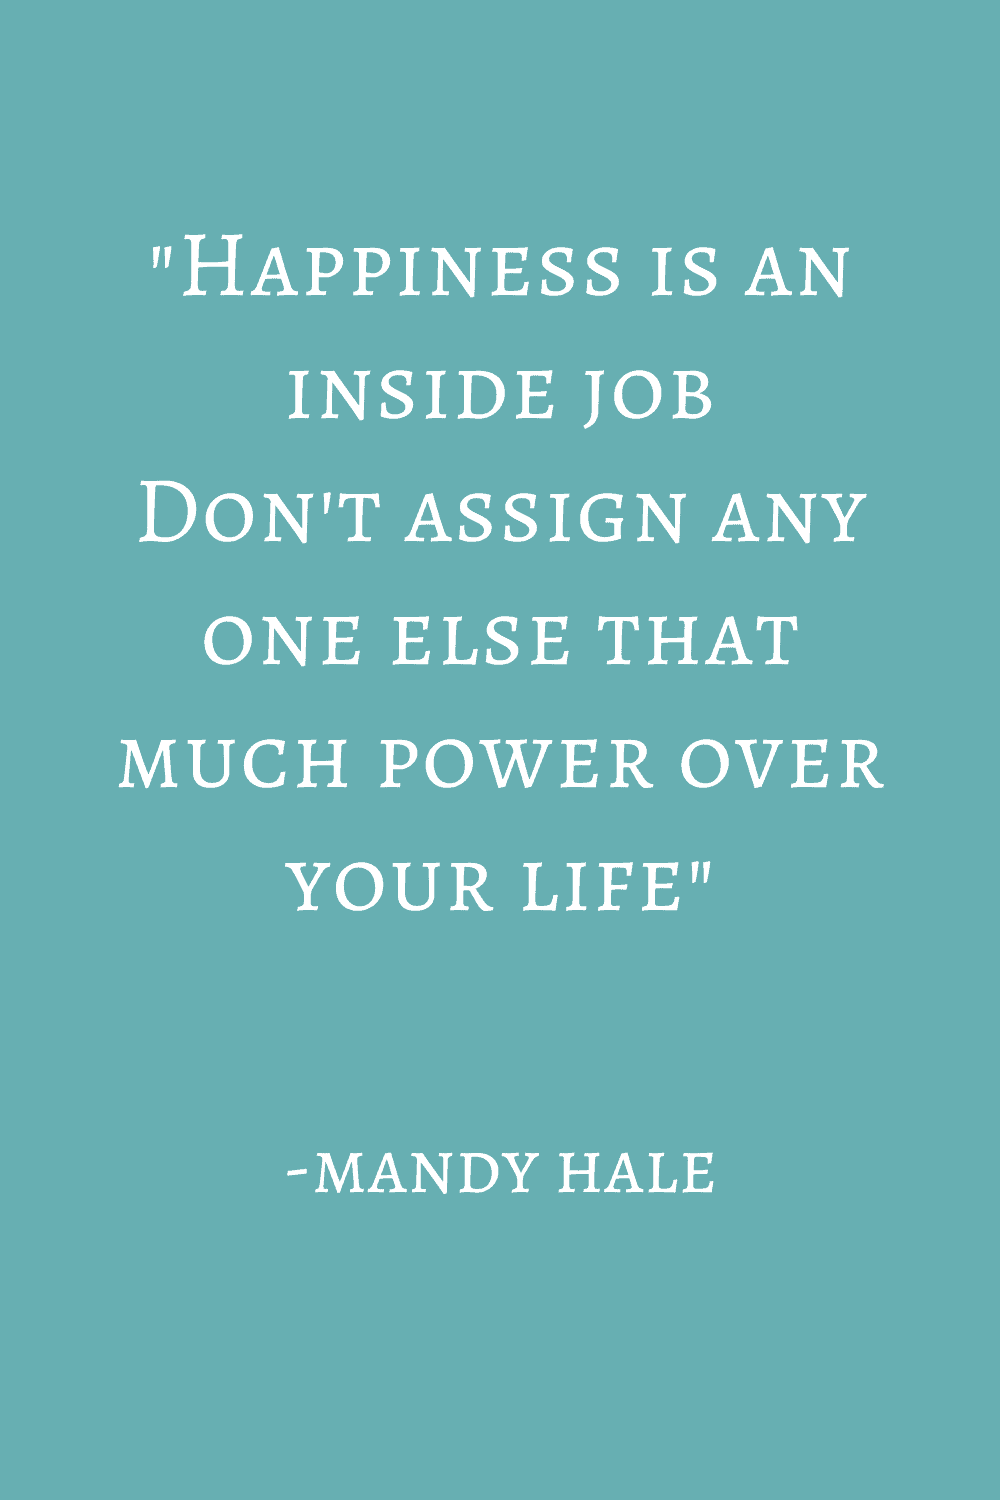 happiness quote-mandy hale